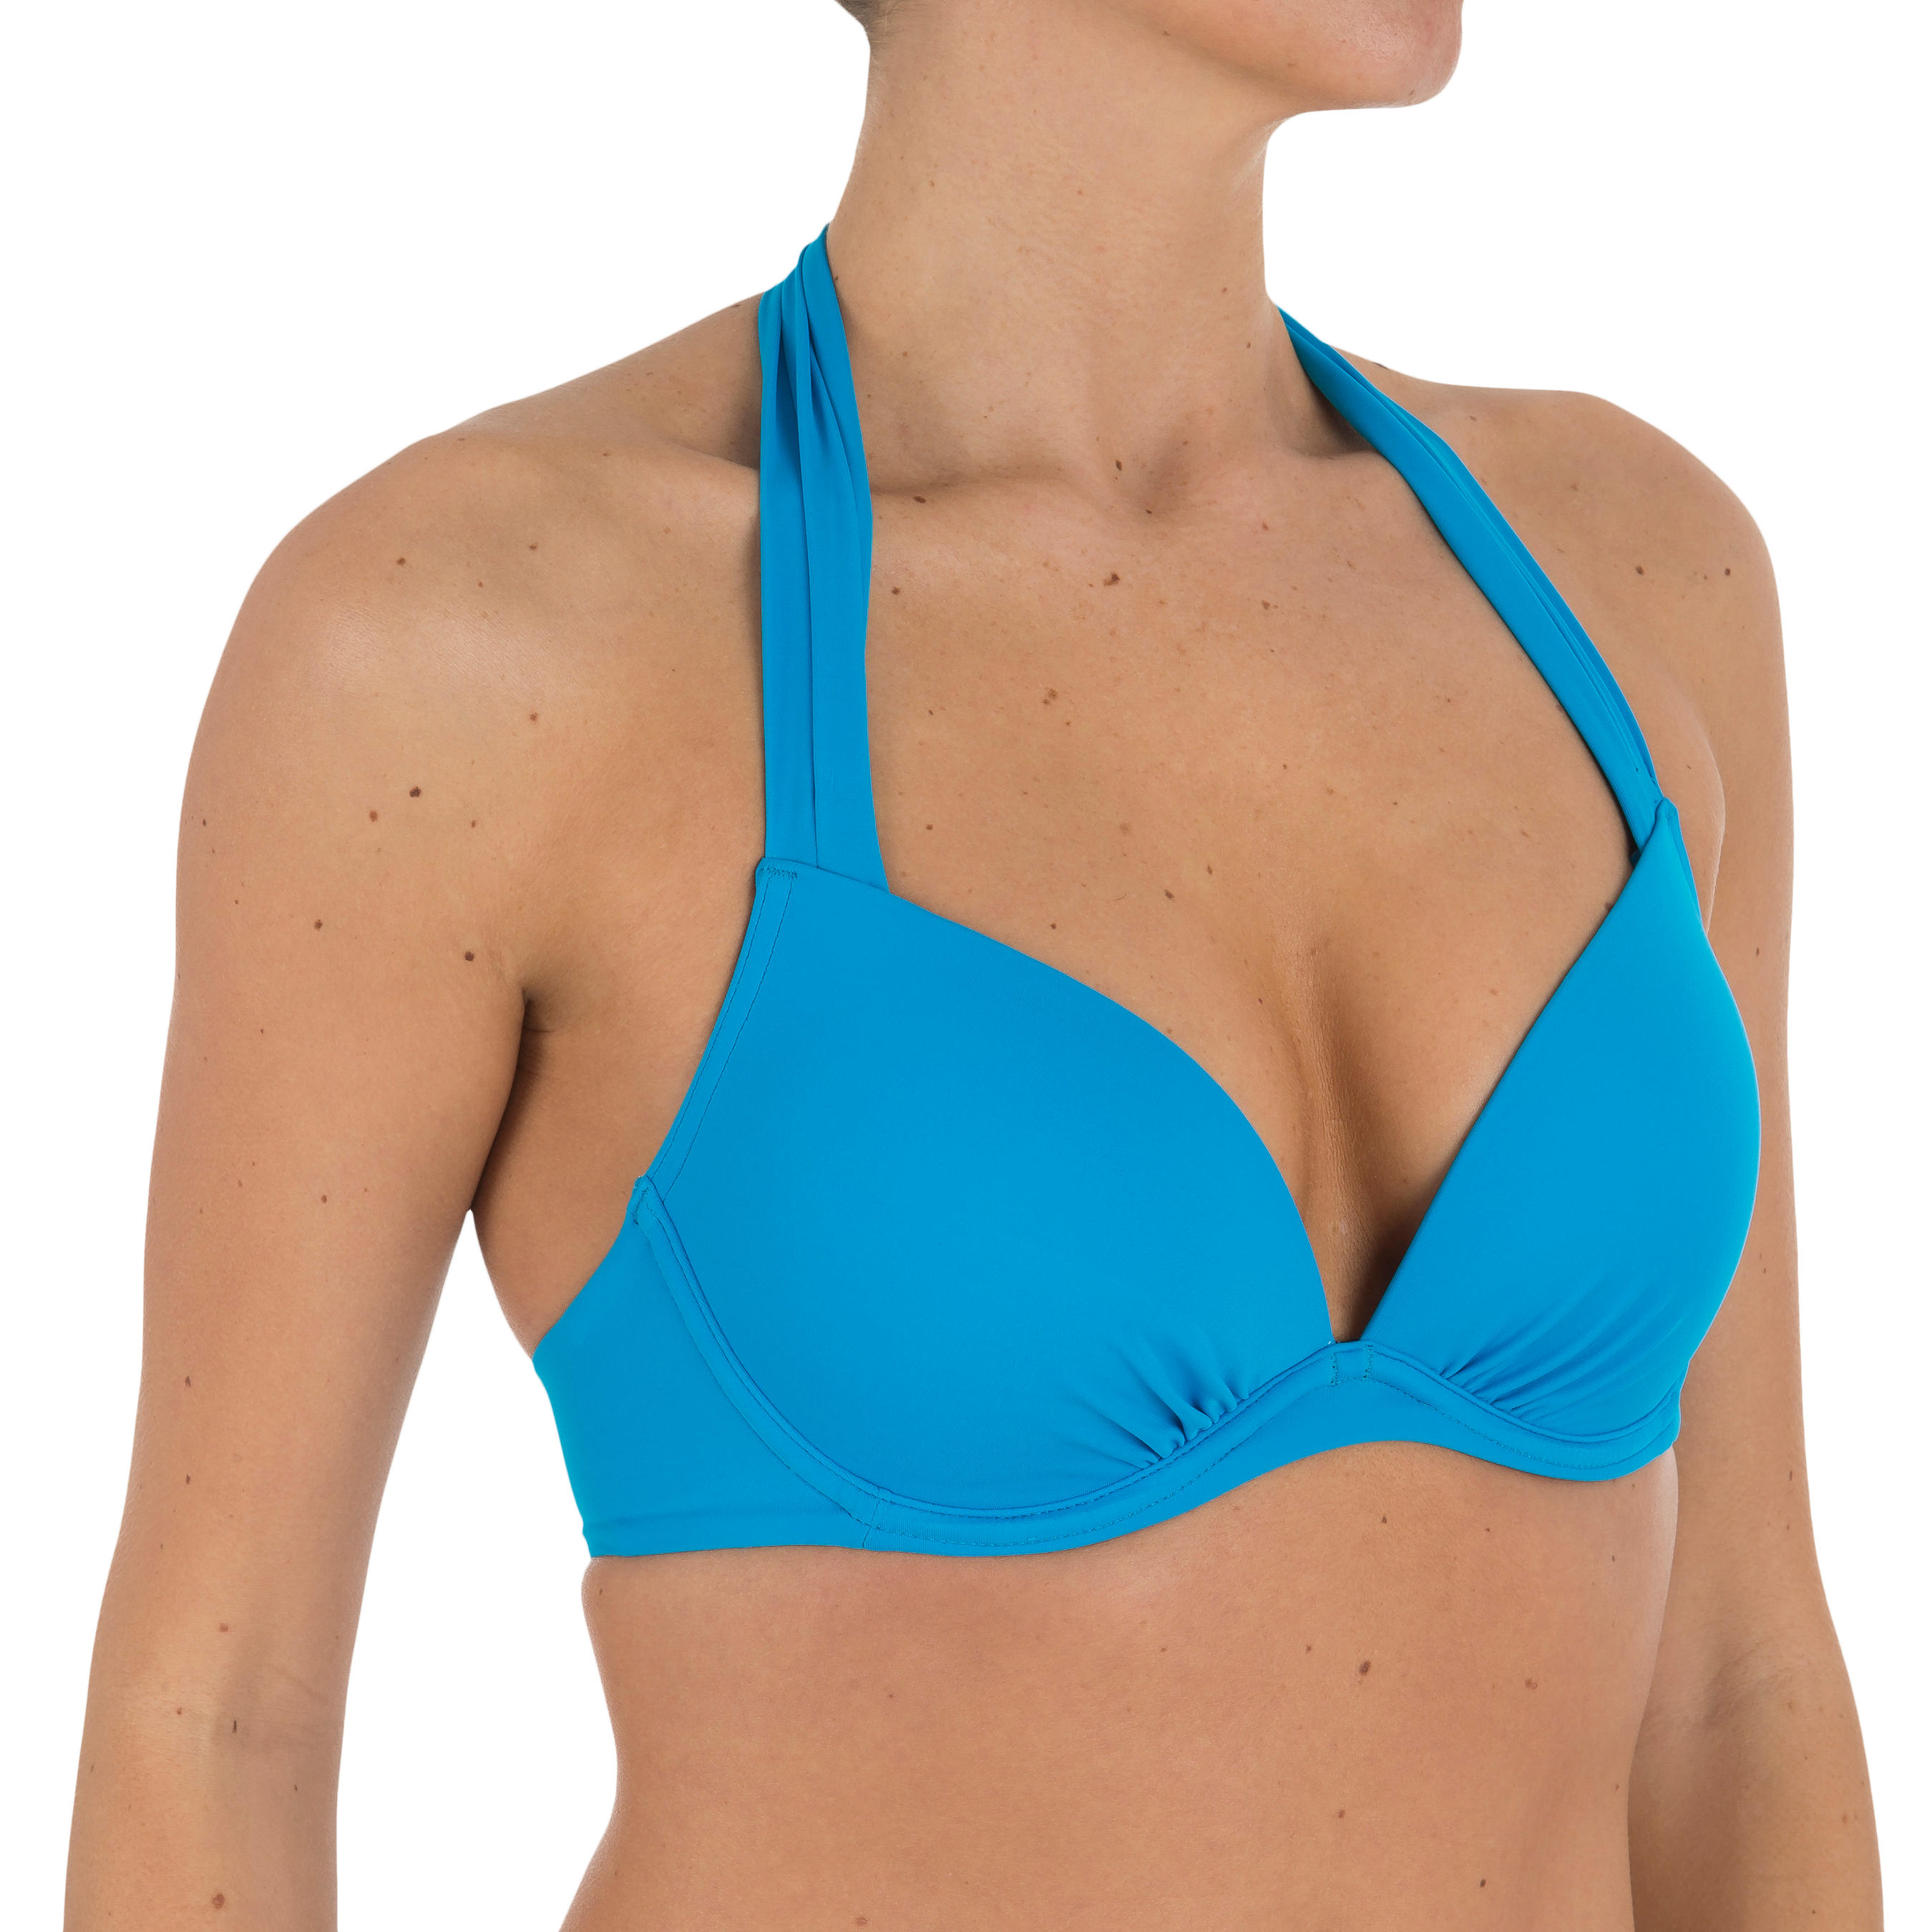 OLAIAN Elena Women’s Underwired Push Up Swimsuit Top With Underband - Blue